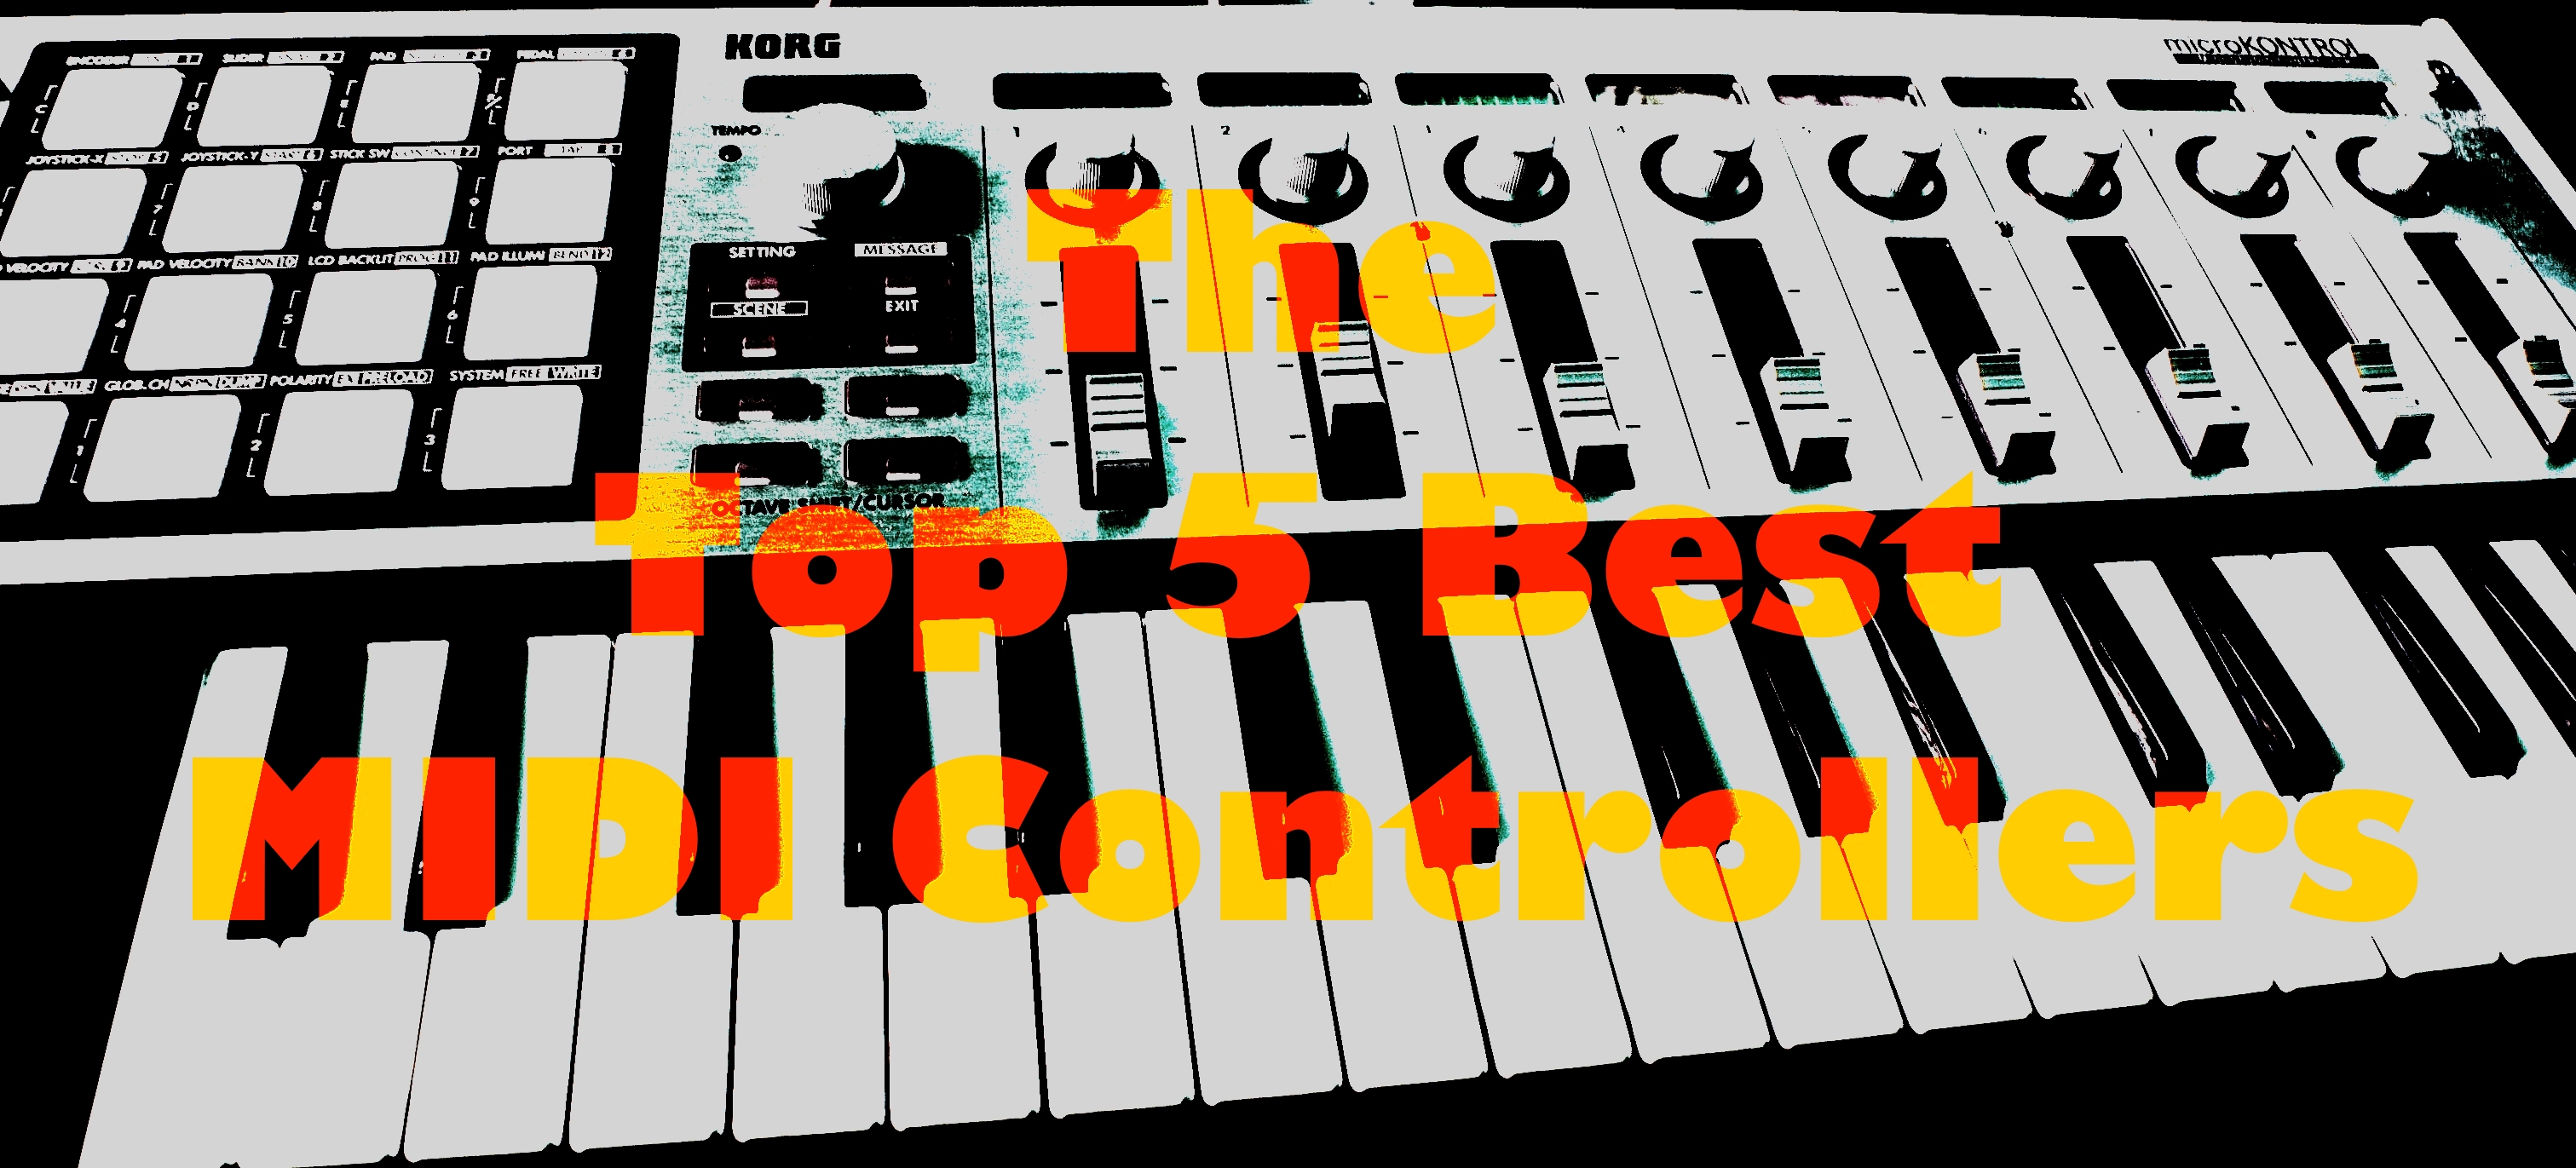 The top 5 best MIDI controllers